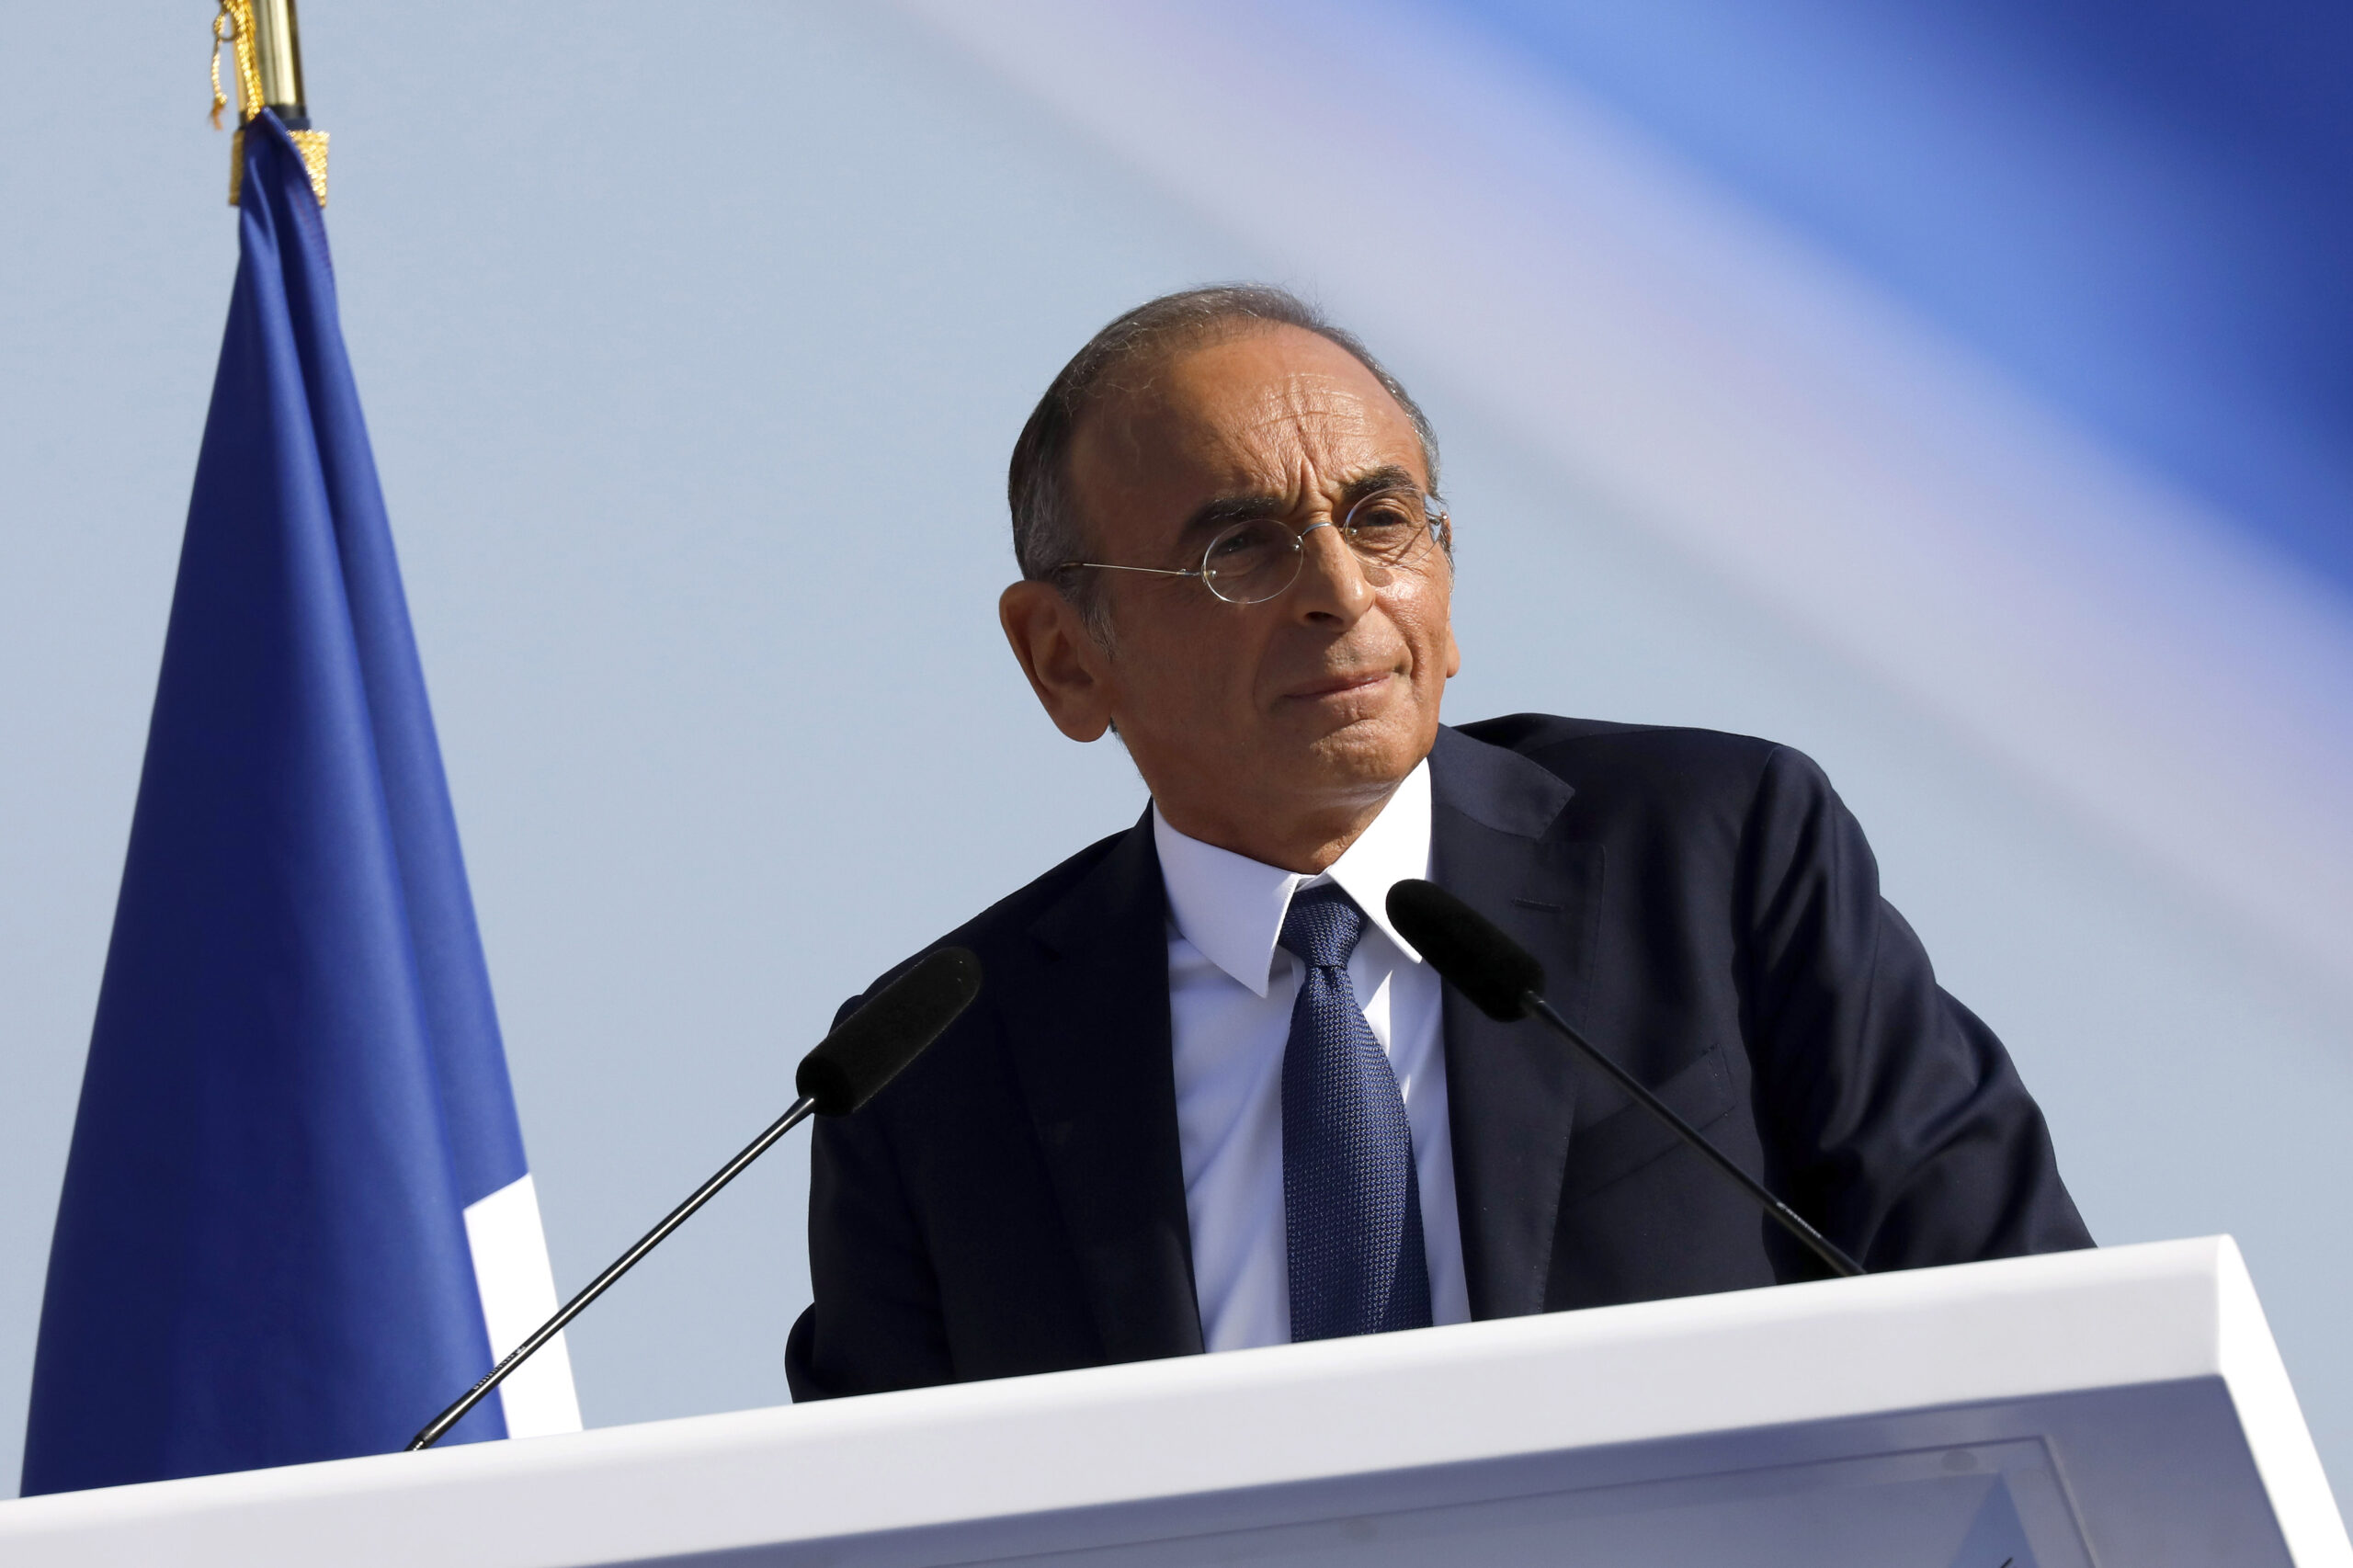 Zemmour, dressed in a black suit and blue tie, stands at a podium with a microphone